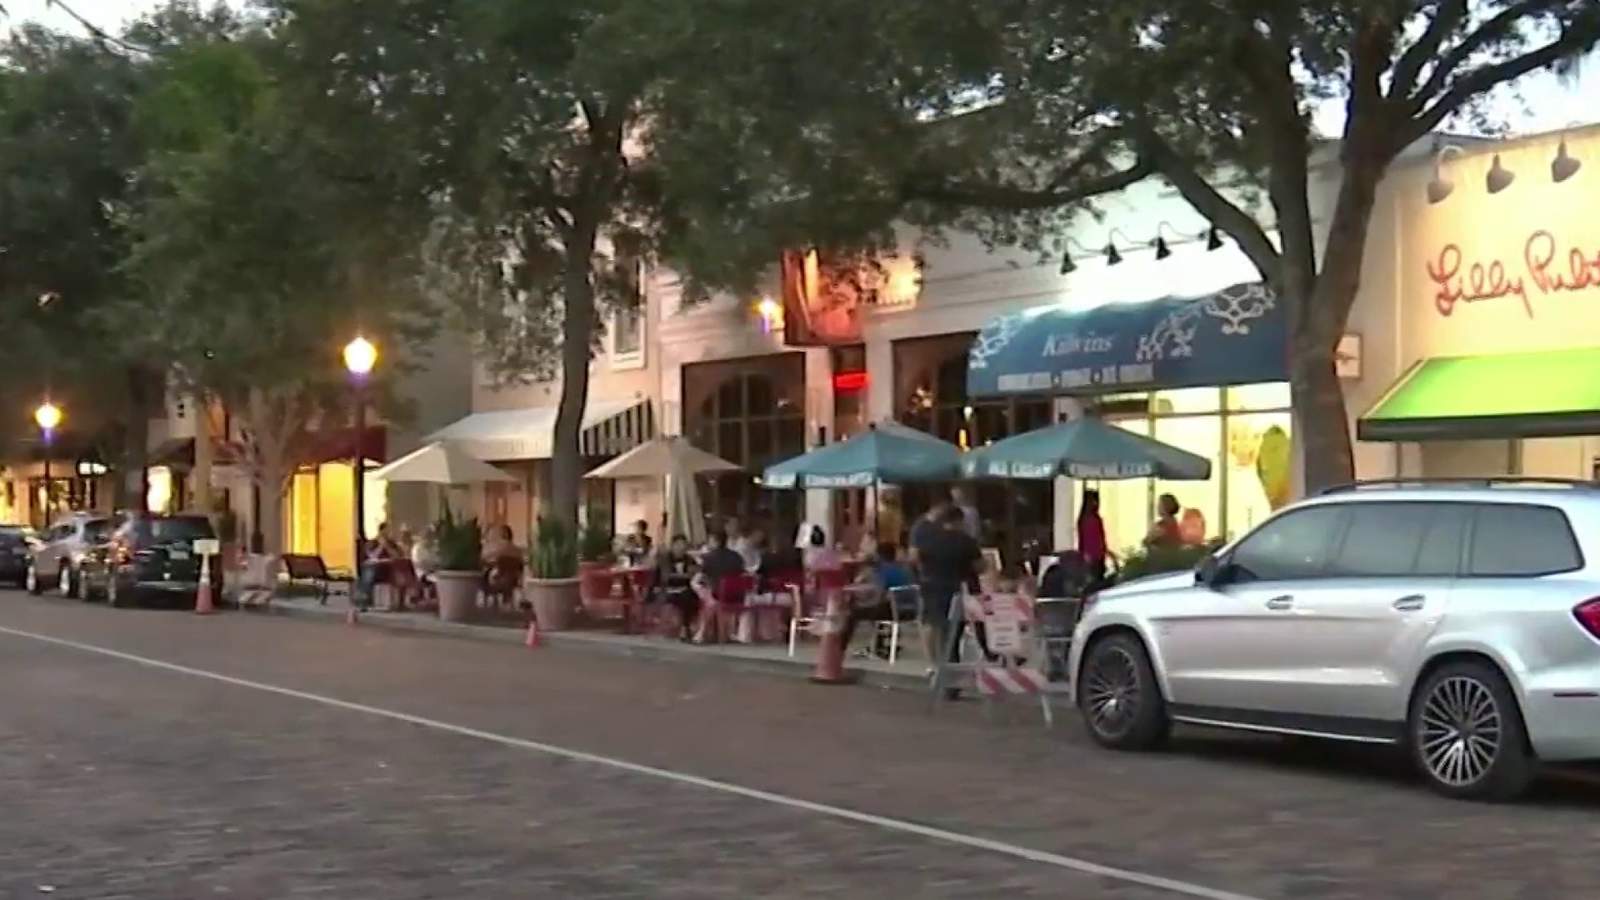 People enjoy Sunday outside in Winter Park, even as COVID cases surge